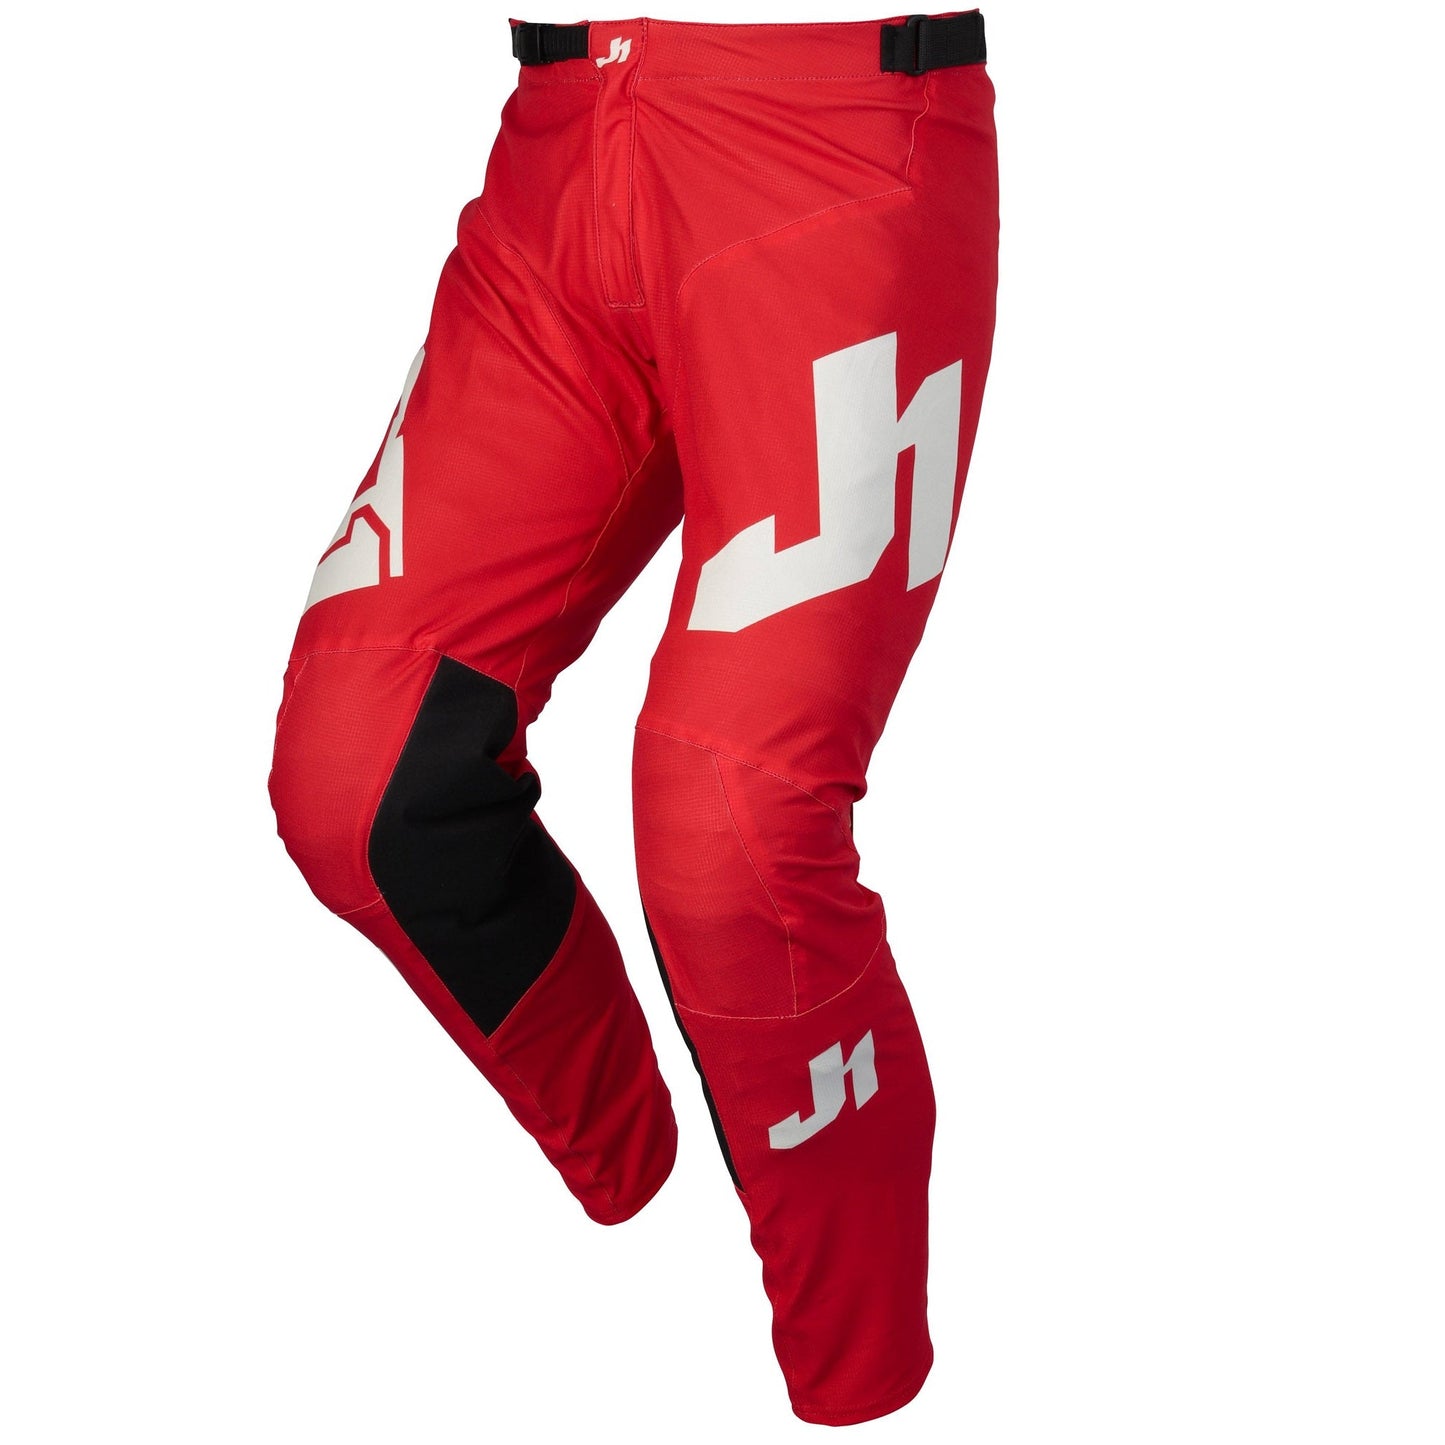 Just 1 Youth Bundle - Youth Motocross Kit - Red - Pants & Jersey - Just1